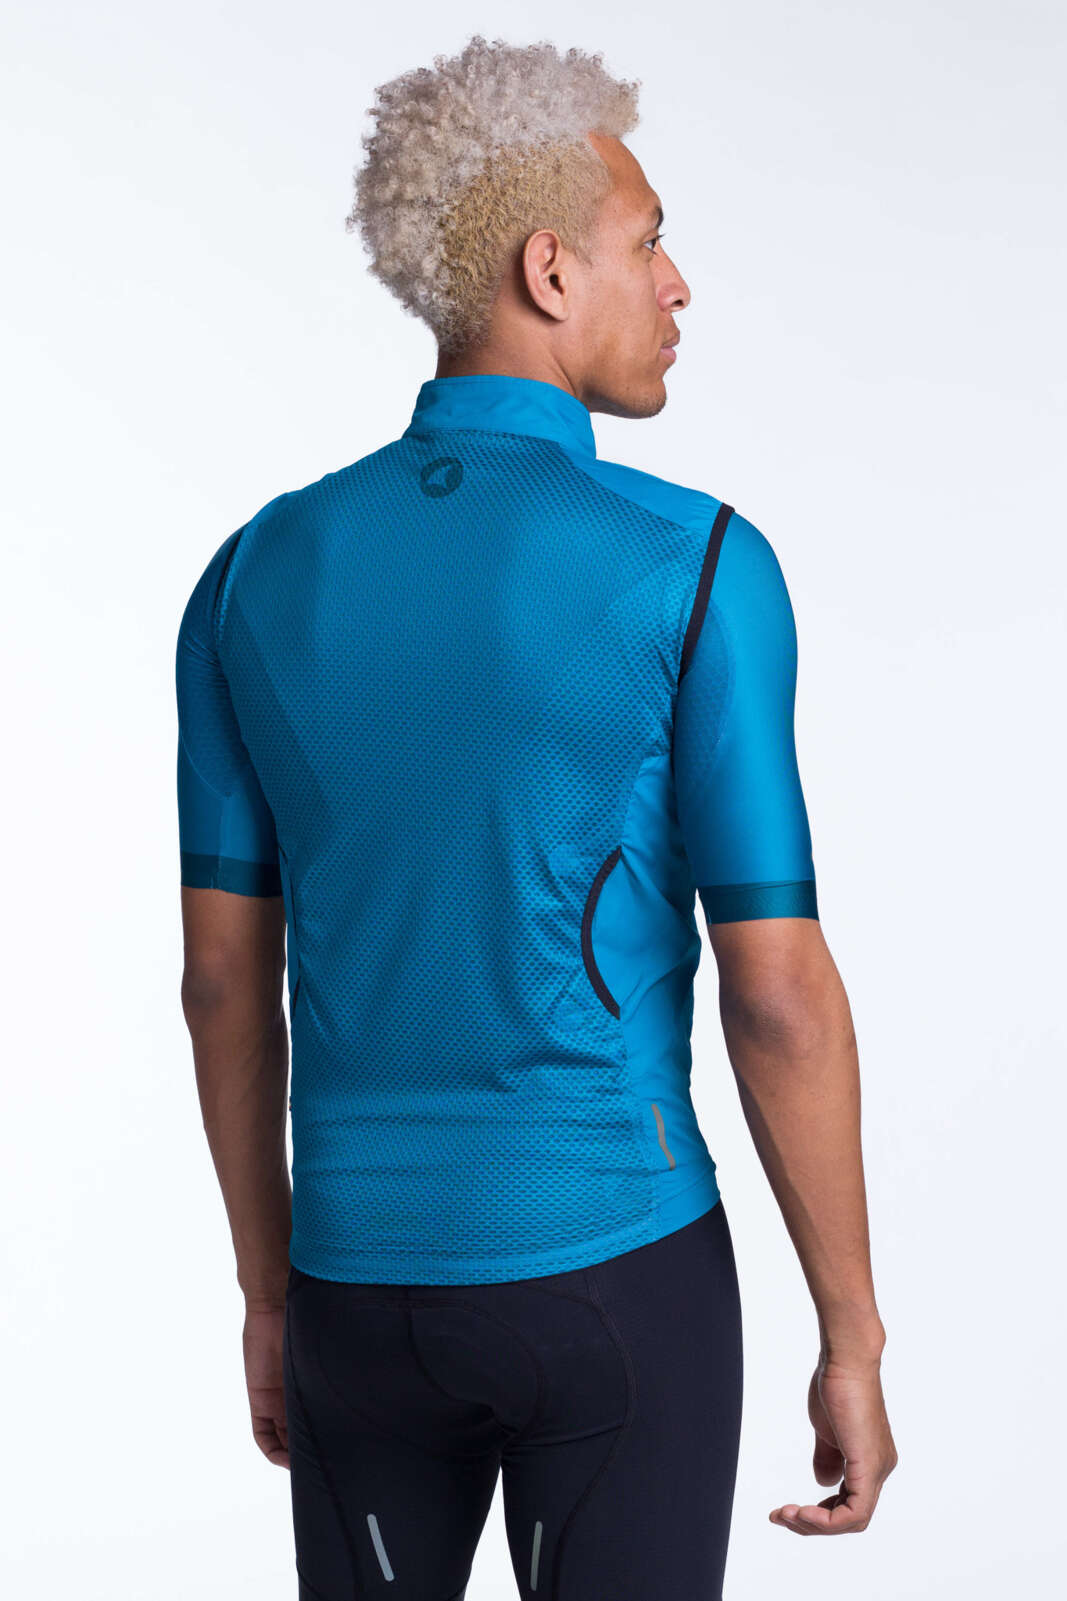 Men's Teal Packable Cycling Wind Vest - Back View